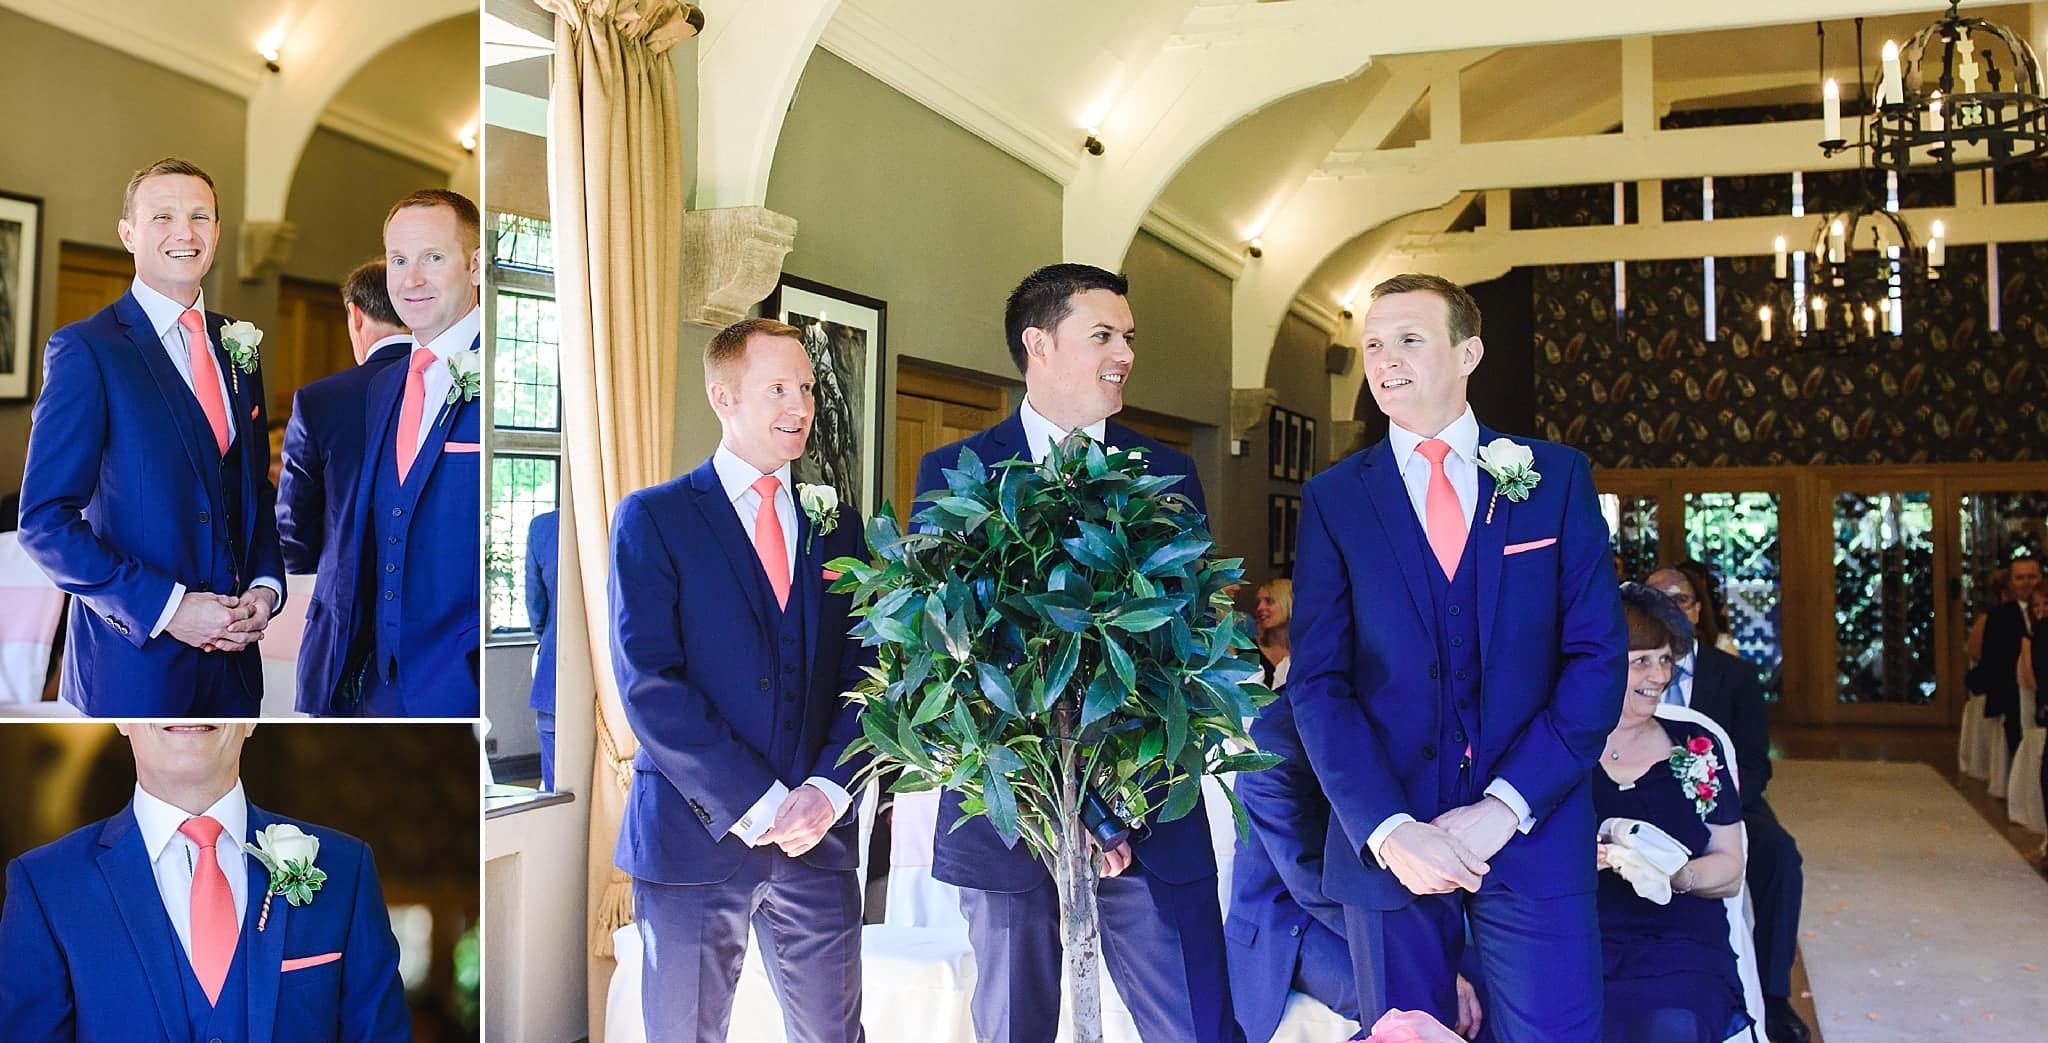 The groom waiting for his bride with groomsmen at the Hare and Hounds wedding ceremony